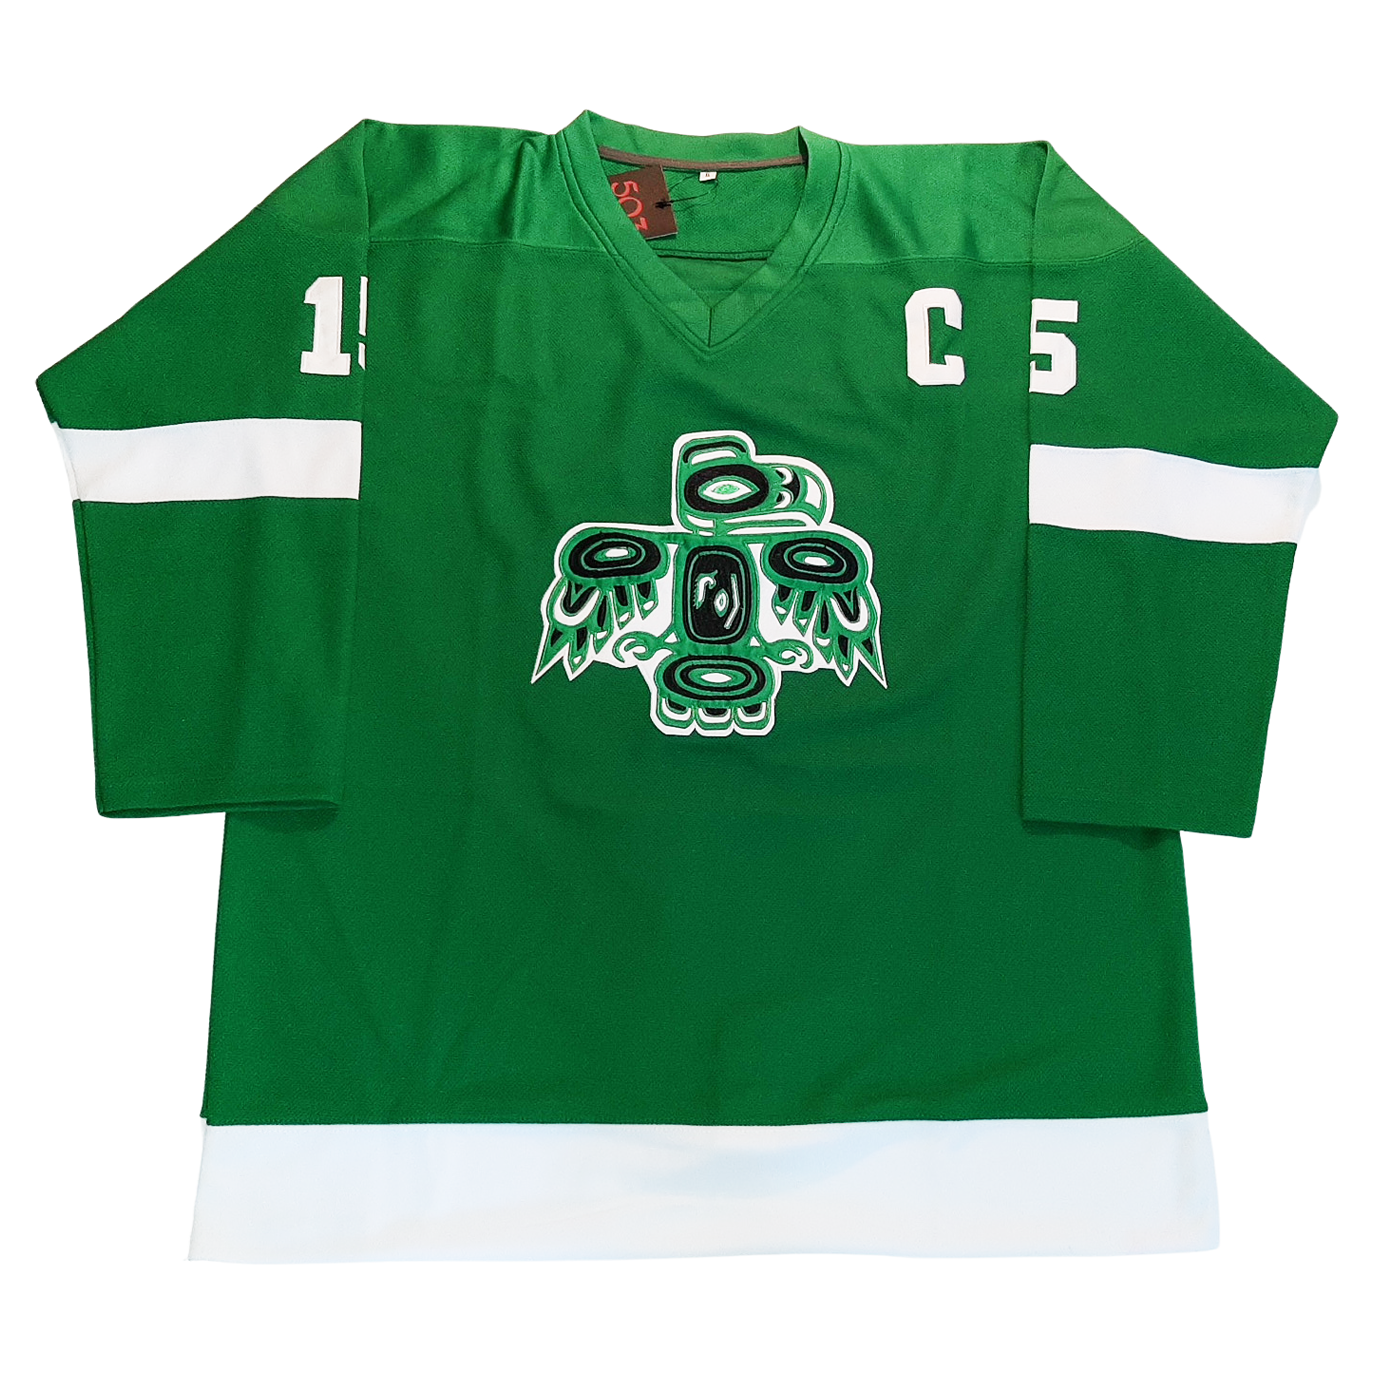 Buy Vintage Nhl Jersey Online In India -  India